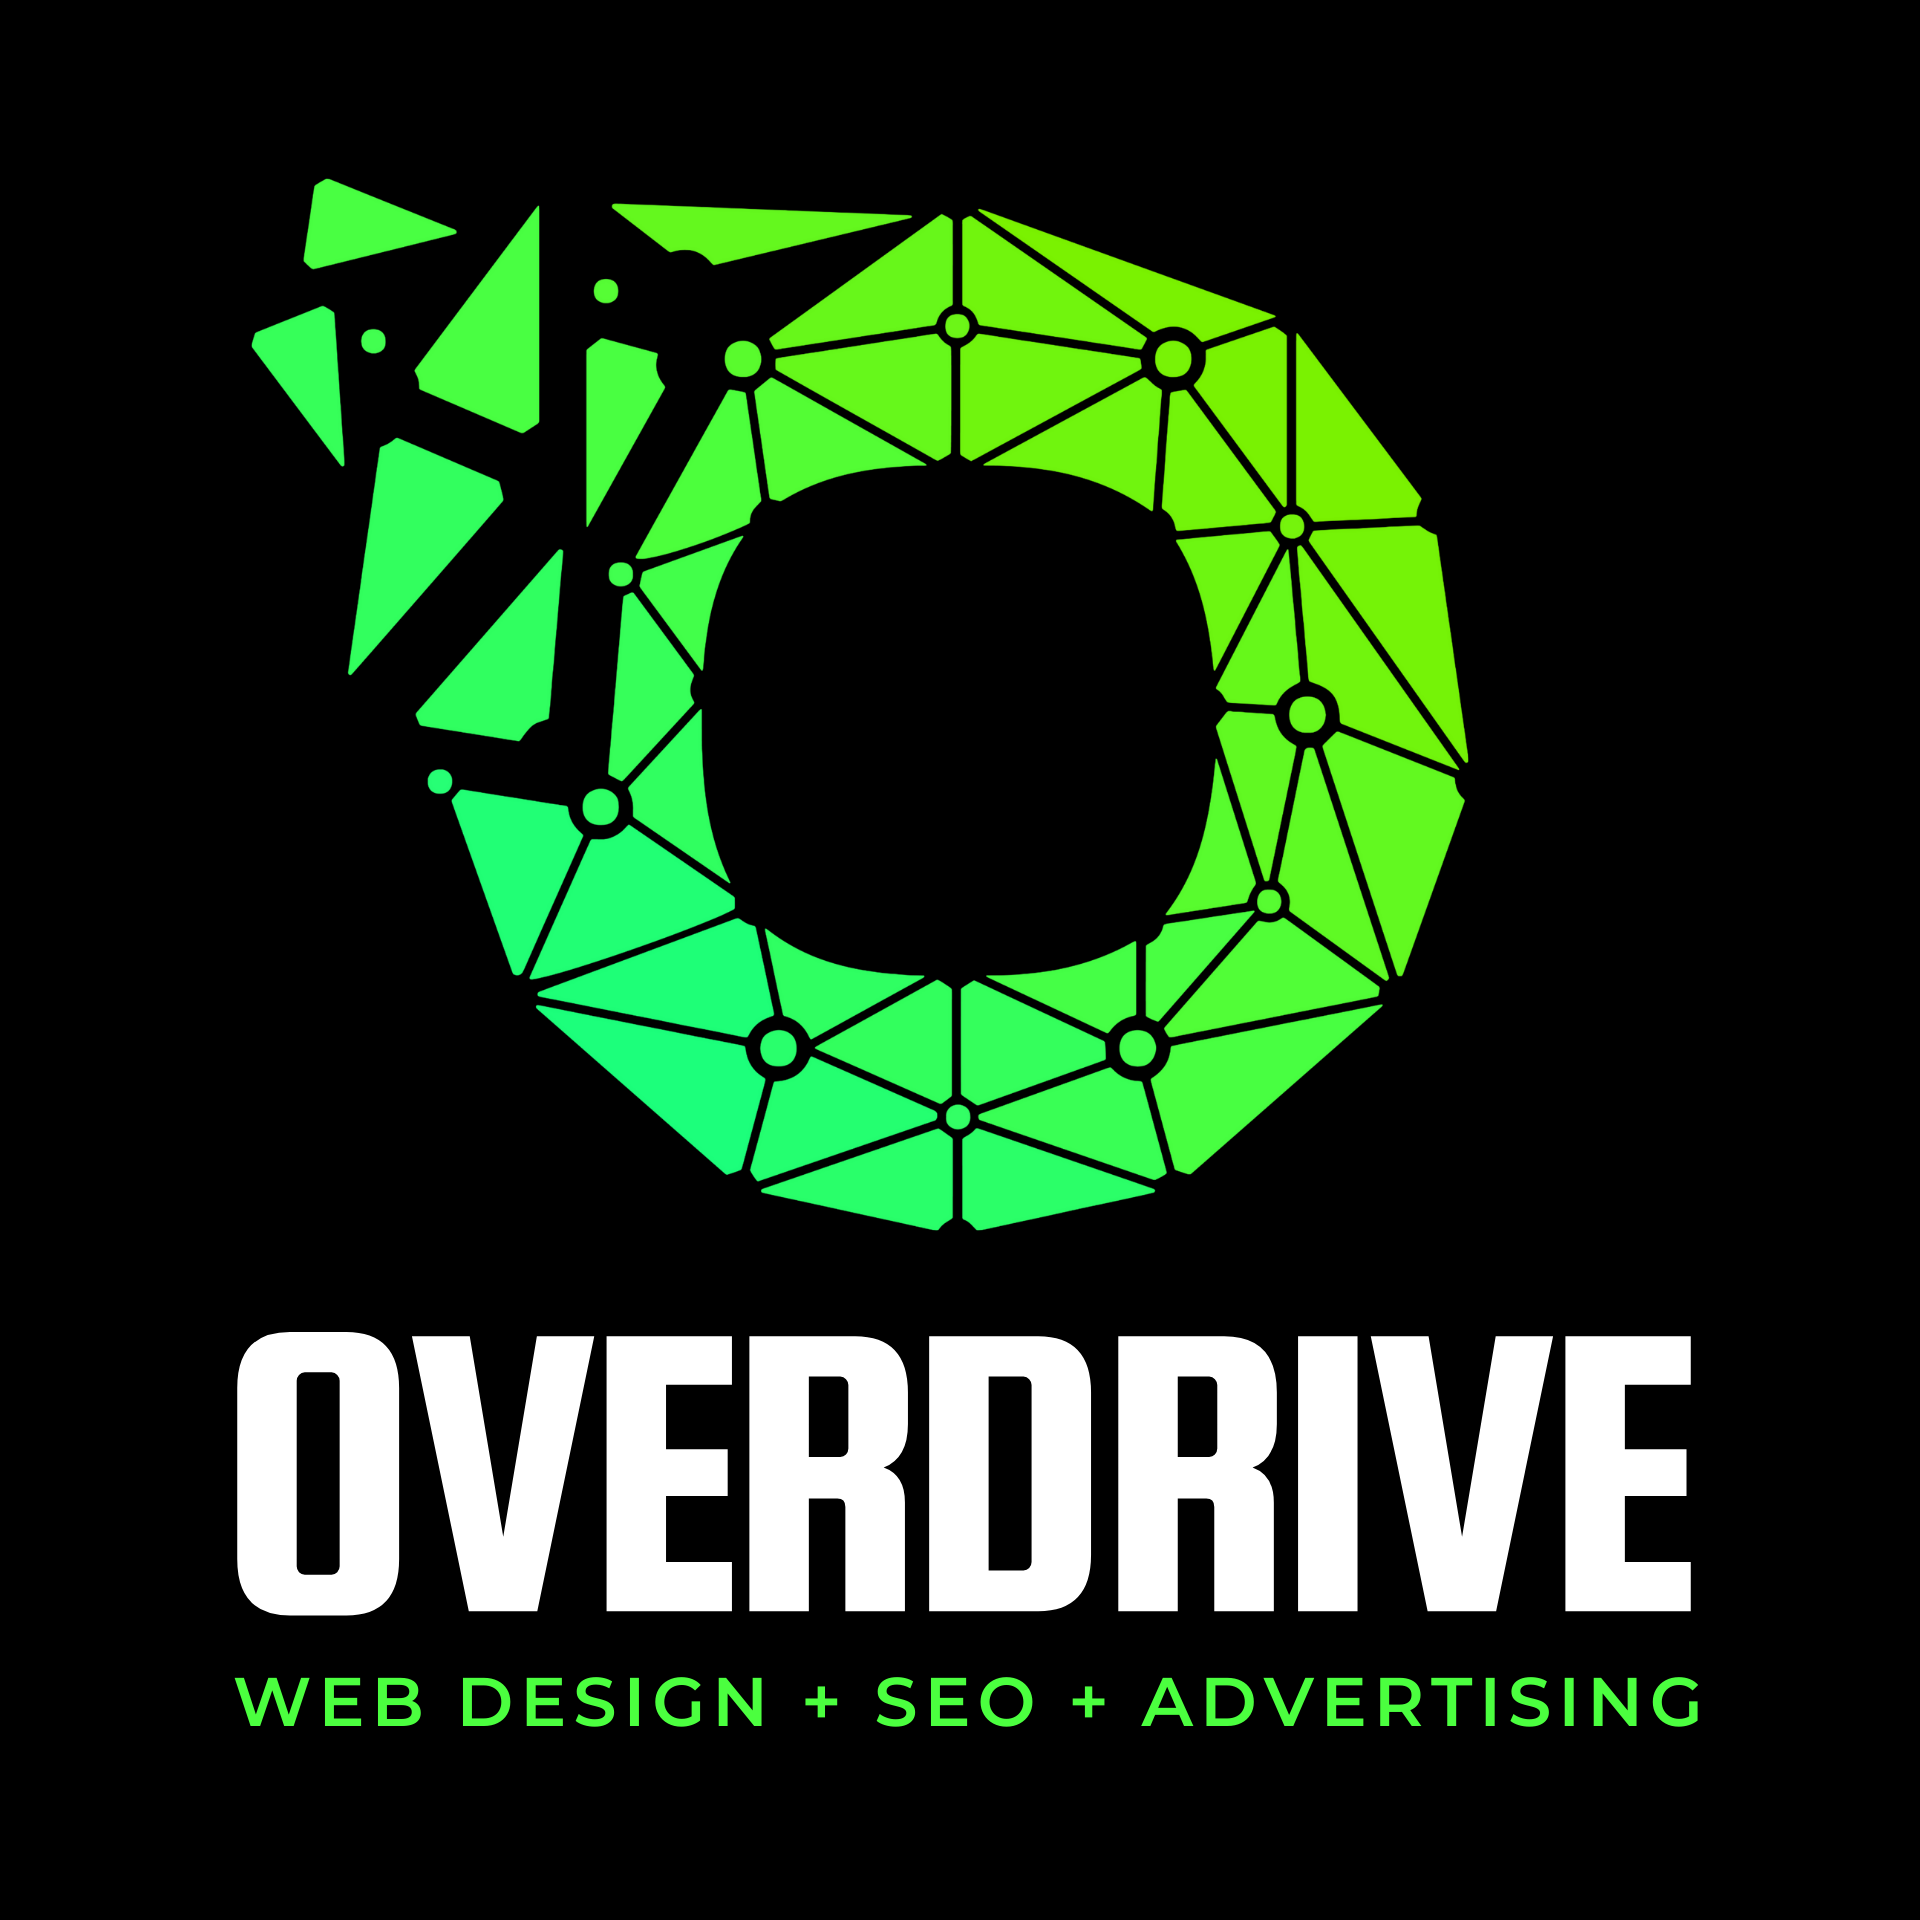 Elevating Your Online Presence with Overdrive Digital Marketing